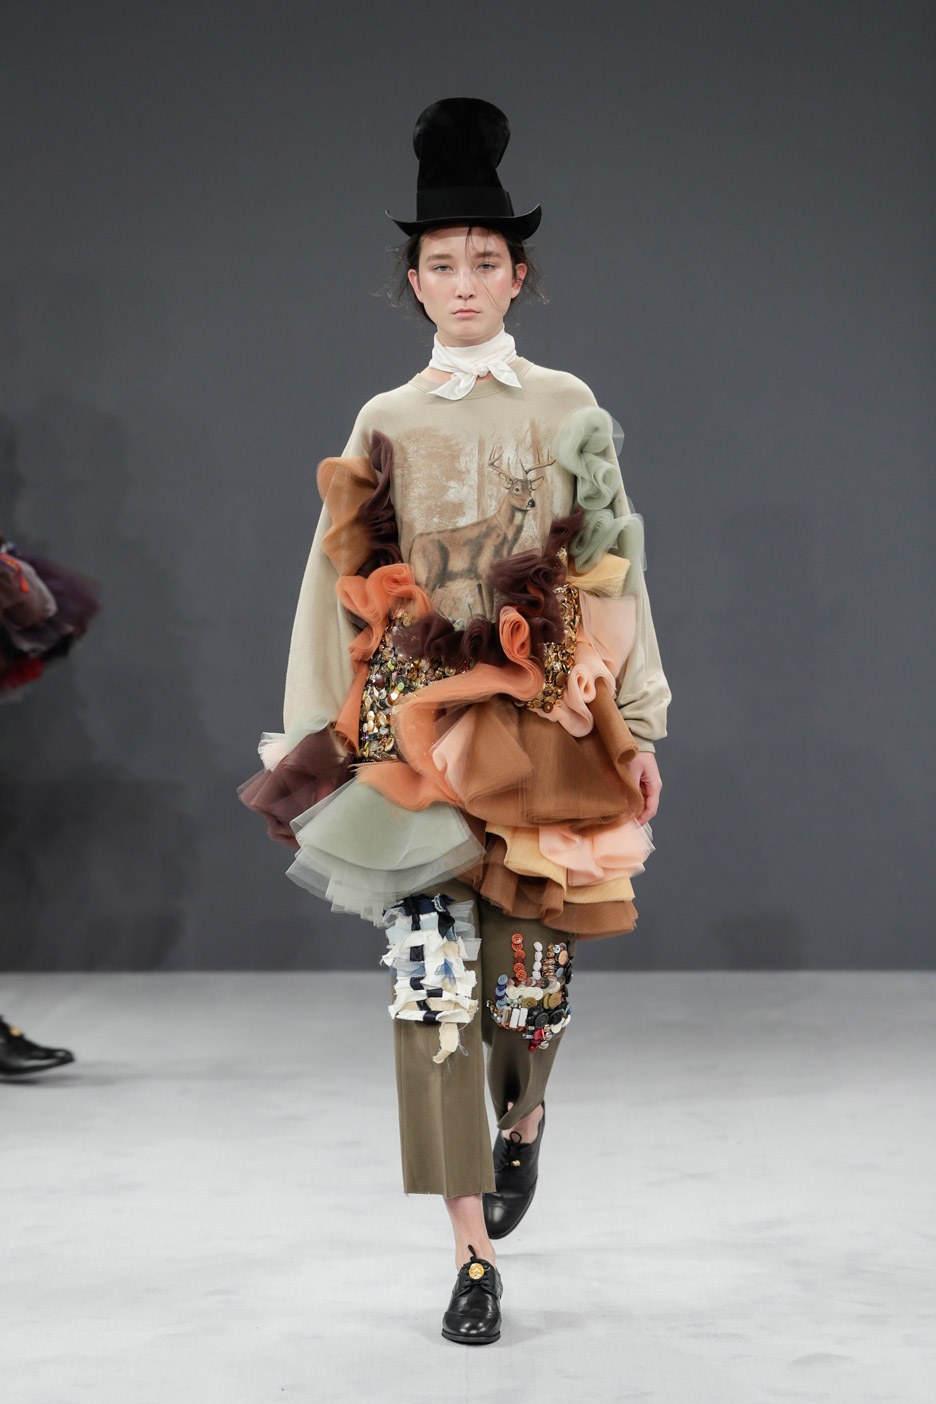 Viktor & Rolf couture garments made from recycled fabrics